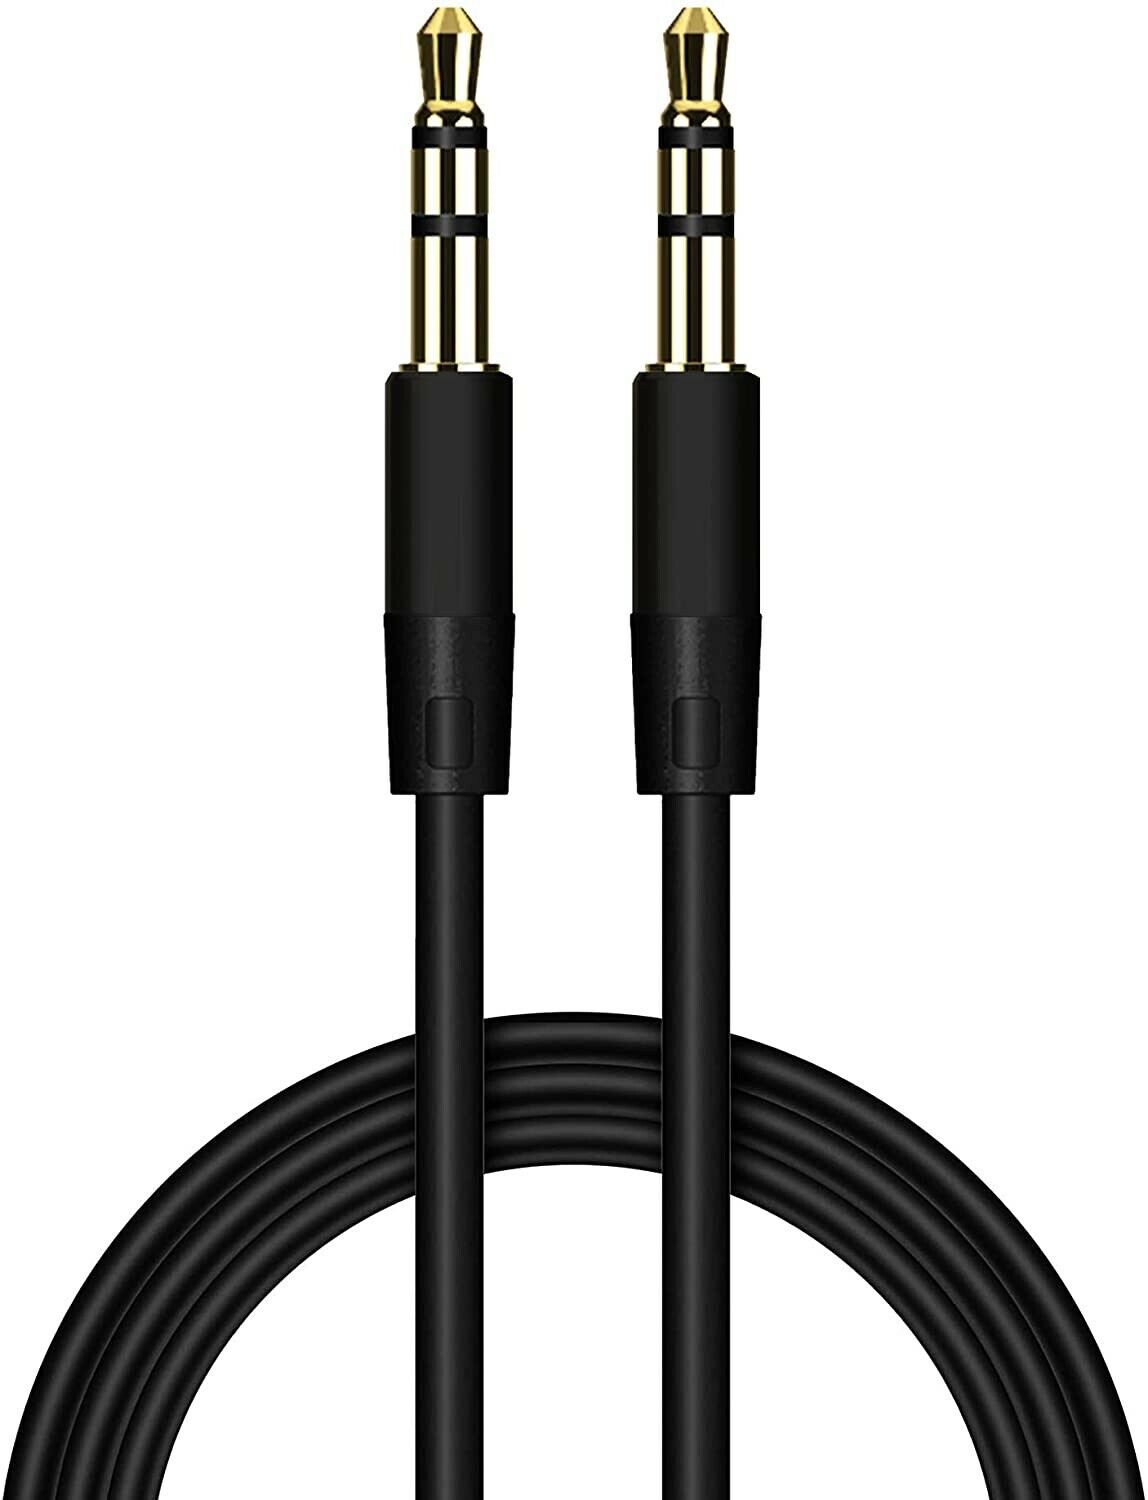 Earldom 3.5mm AUX Audio Cable 1m